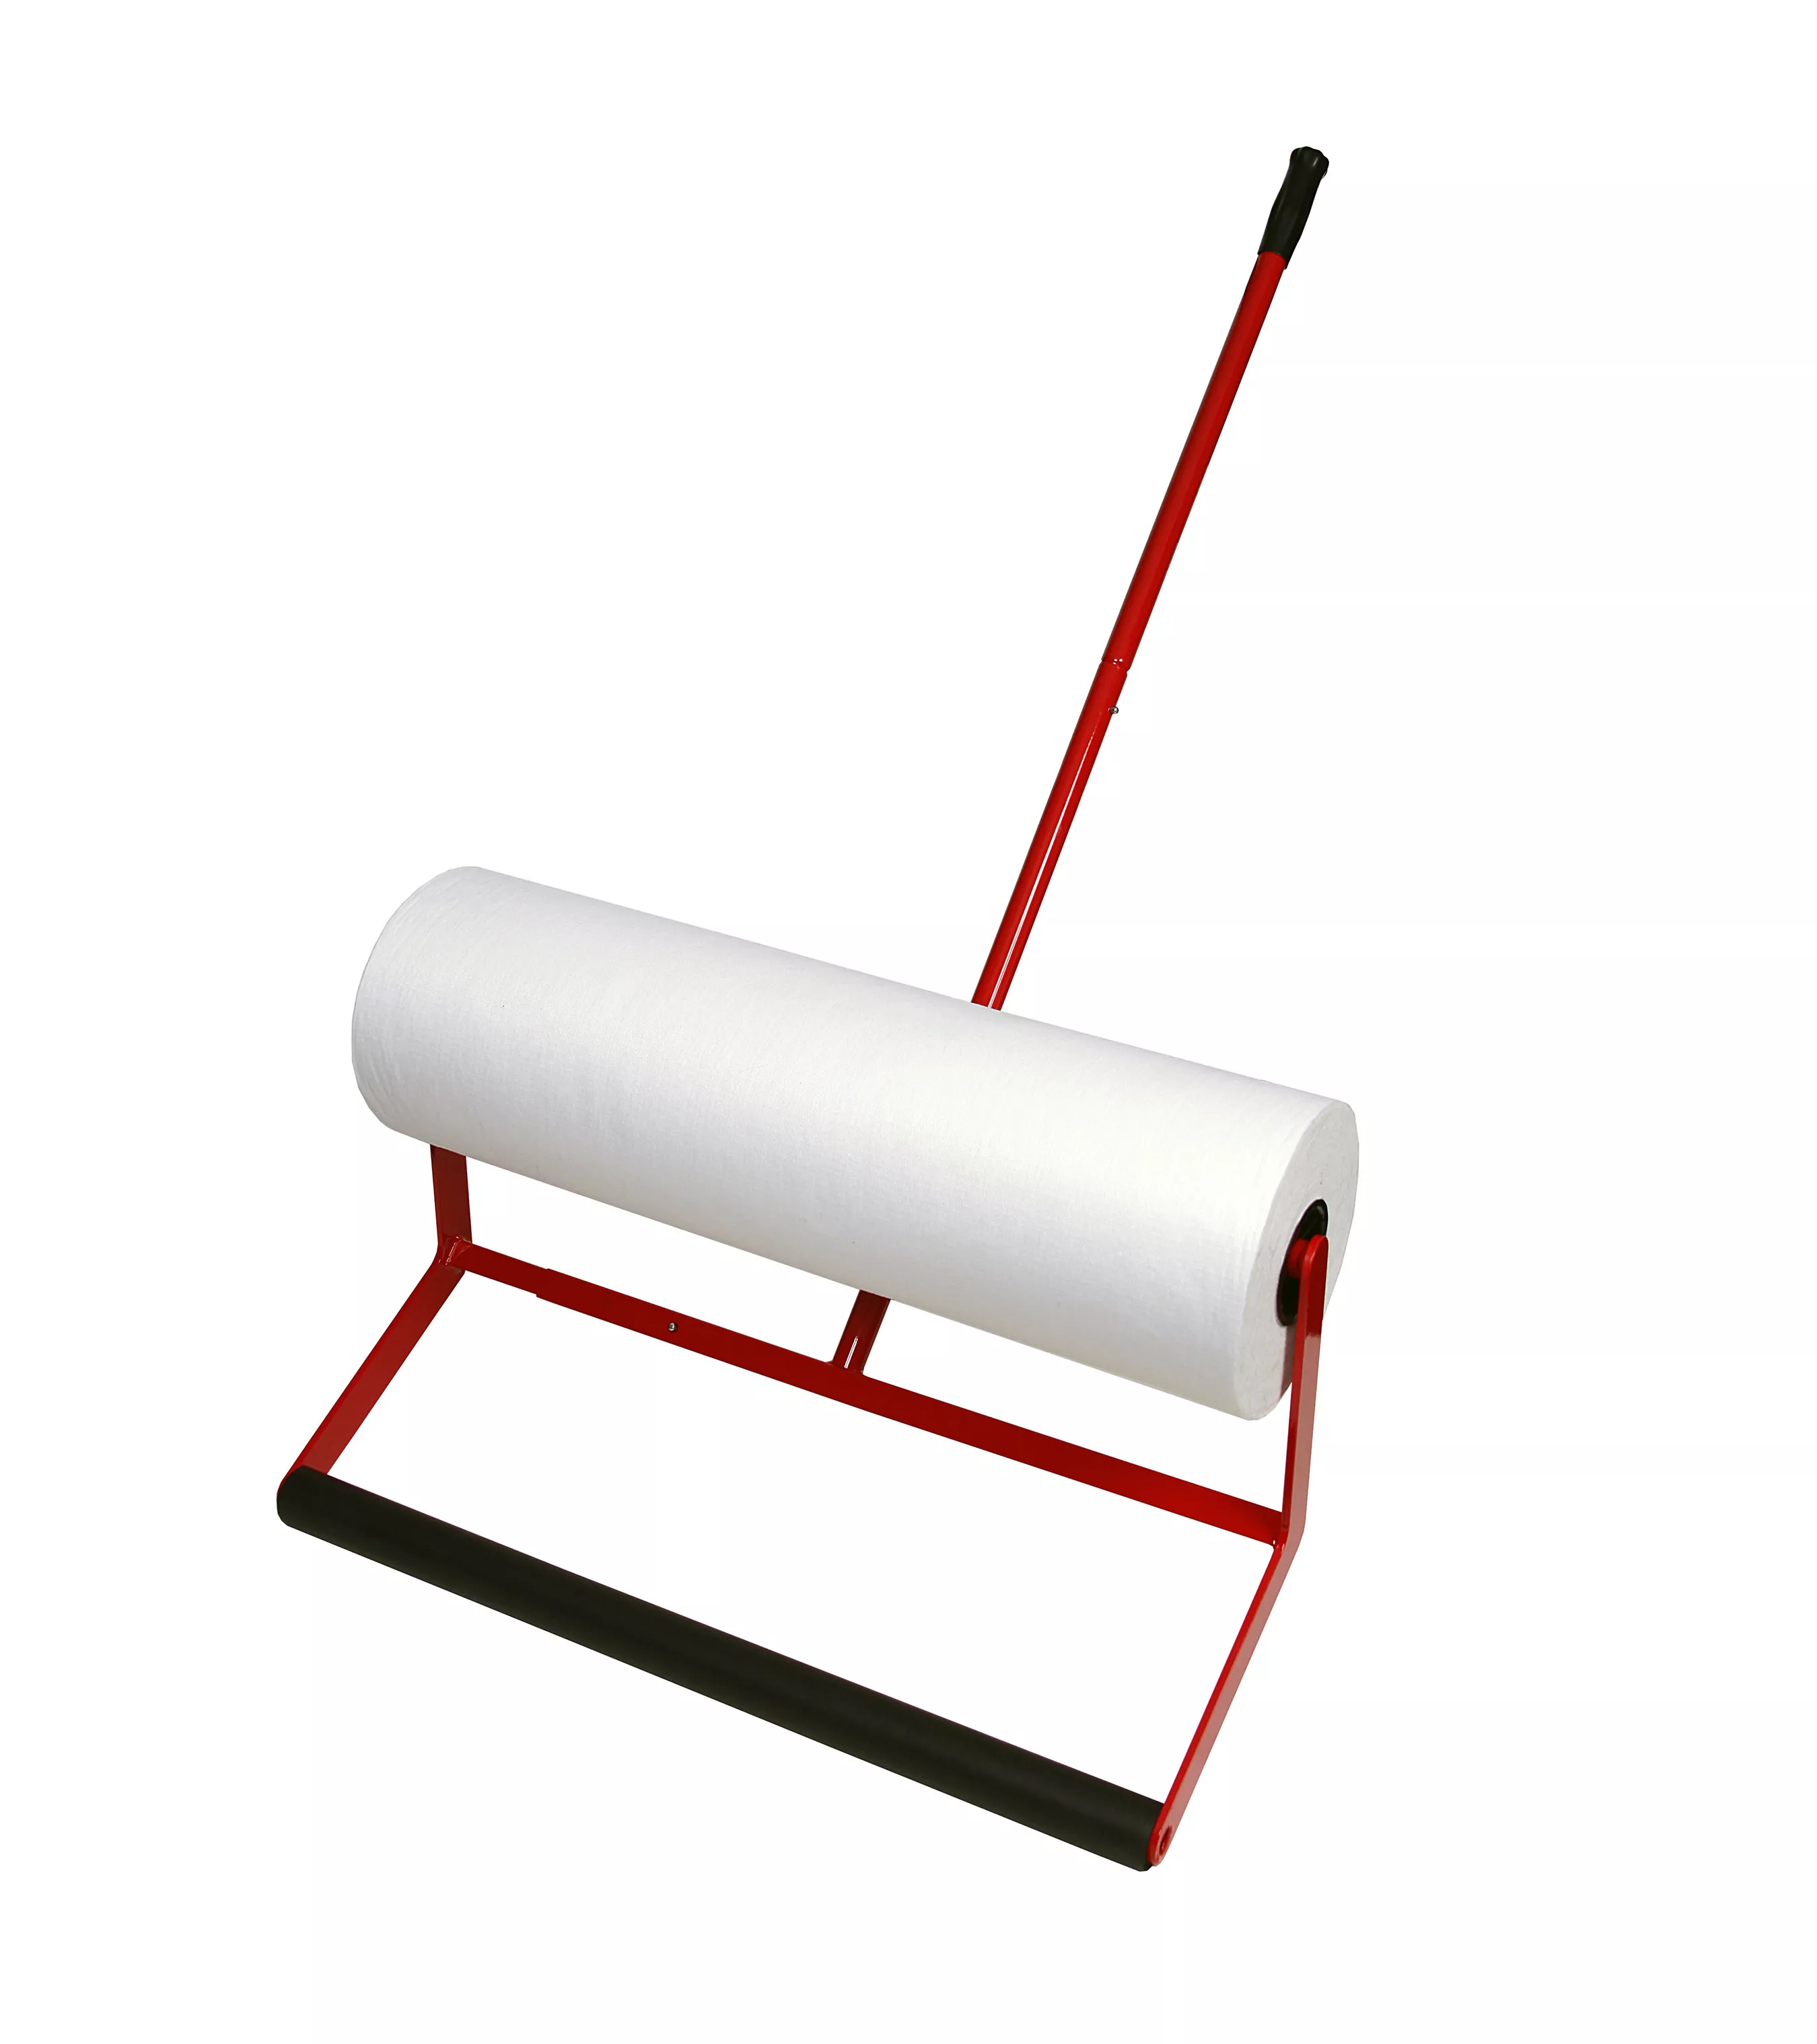 3M™ Surface Protection Material Floor Applicator 36865, 28 in, 1/Case